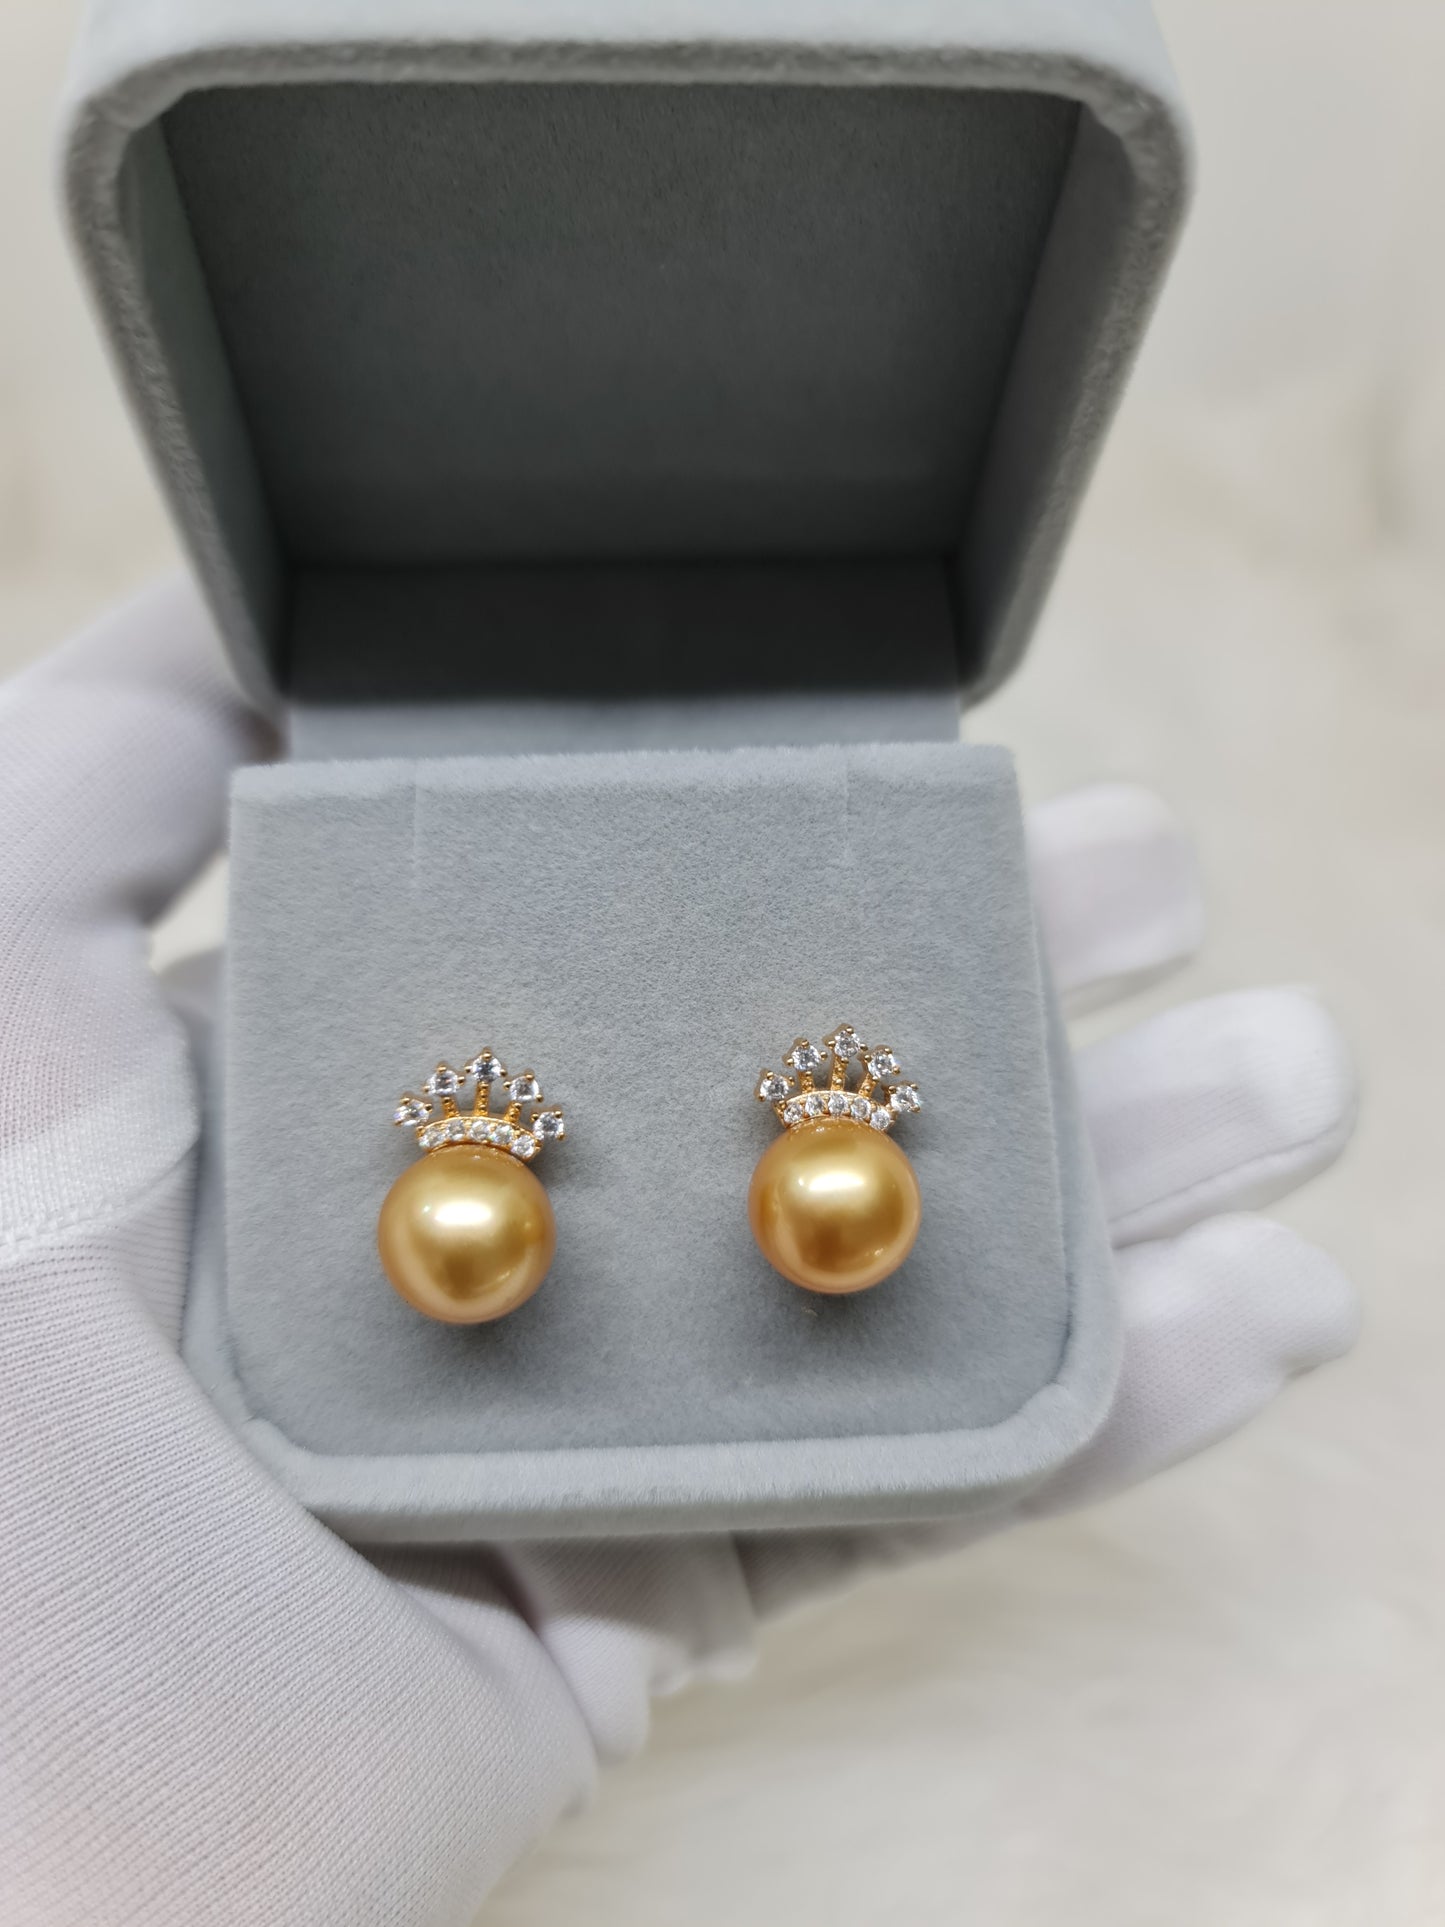 12mm Deep Golden South Sea Pearls Earrings in Gold Plated